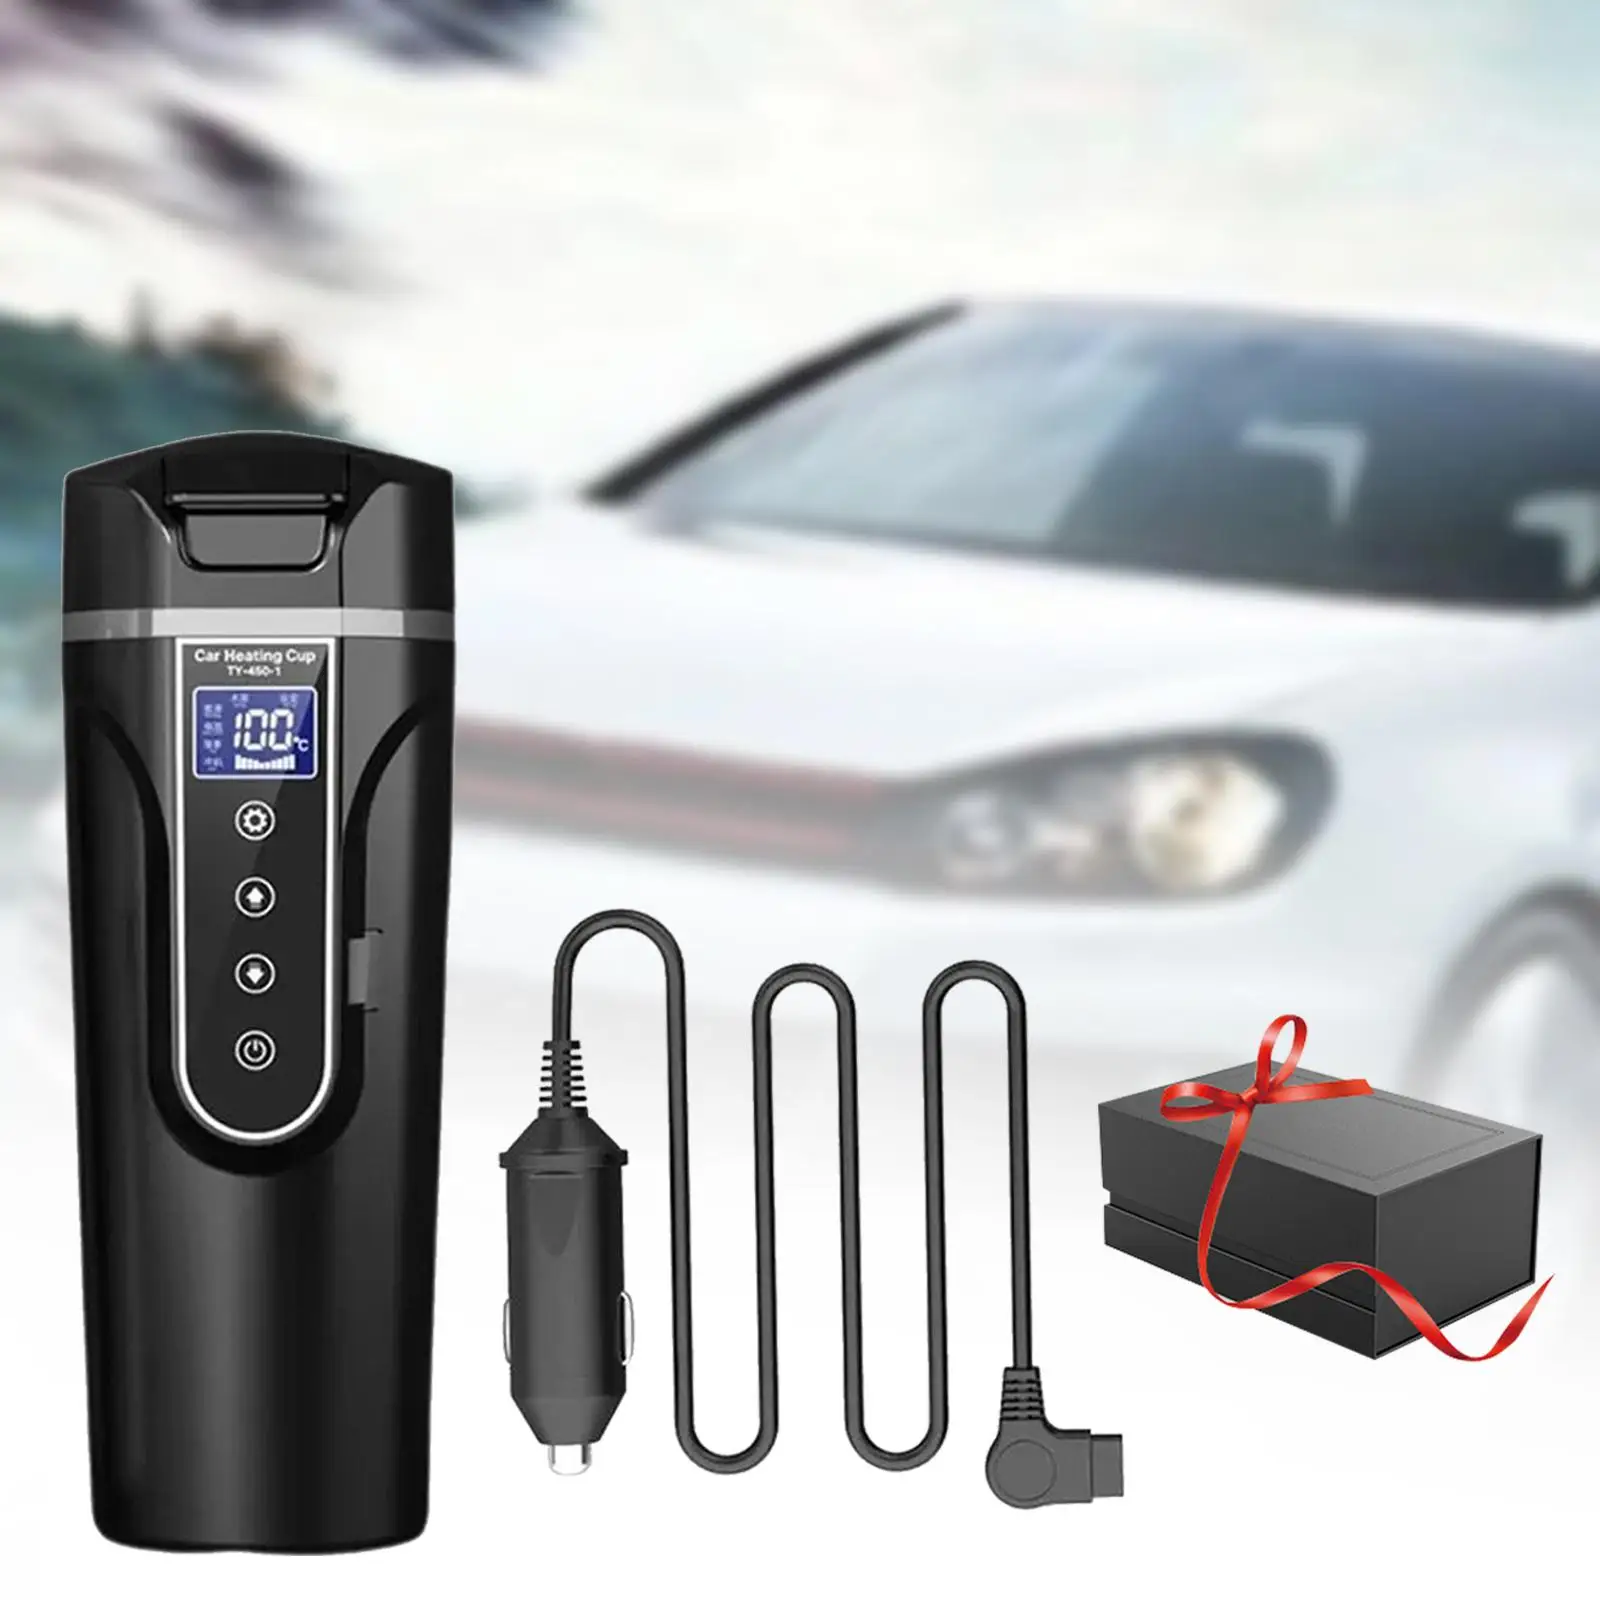 Electric Tea Kettle Quick Heating for Auto Car Drivers Tea Water Milk